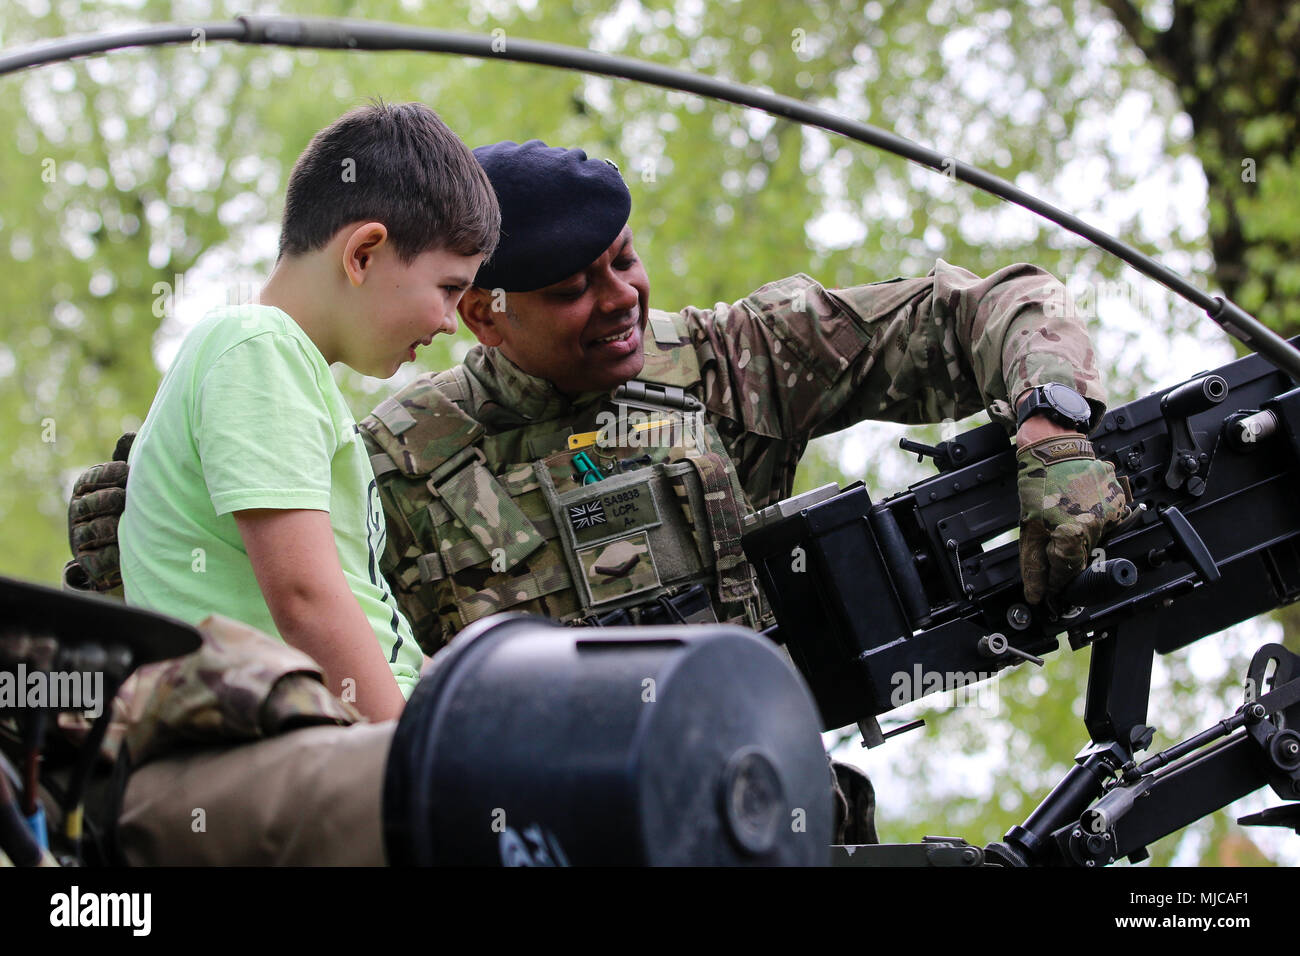 U.K. soldier with the 1st The Queen's Dragoon Guards, shows a Polish child a 12.7mm heavy machine gun on top of a Jackal 2A armored vehicle during a bridge opening ceremony in Giżycko, Poland, May 1, 2018. The ceremony was held between the town of Giżycko and the Soldiers of Battle Group Poland: a unique, multinational coalition of U.S., U.K., Croatian and Romanian soldiers who serve with the Polish 15th Mechanized Brigade as a deterrence force in support of NATO’s Enhanced Forward Presence. (U.S. Army photo by Spc. Hubert D. Delany III /22nd Mobile Public Affairs Detachment)    Stock Photo